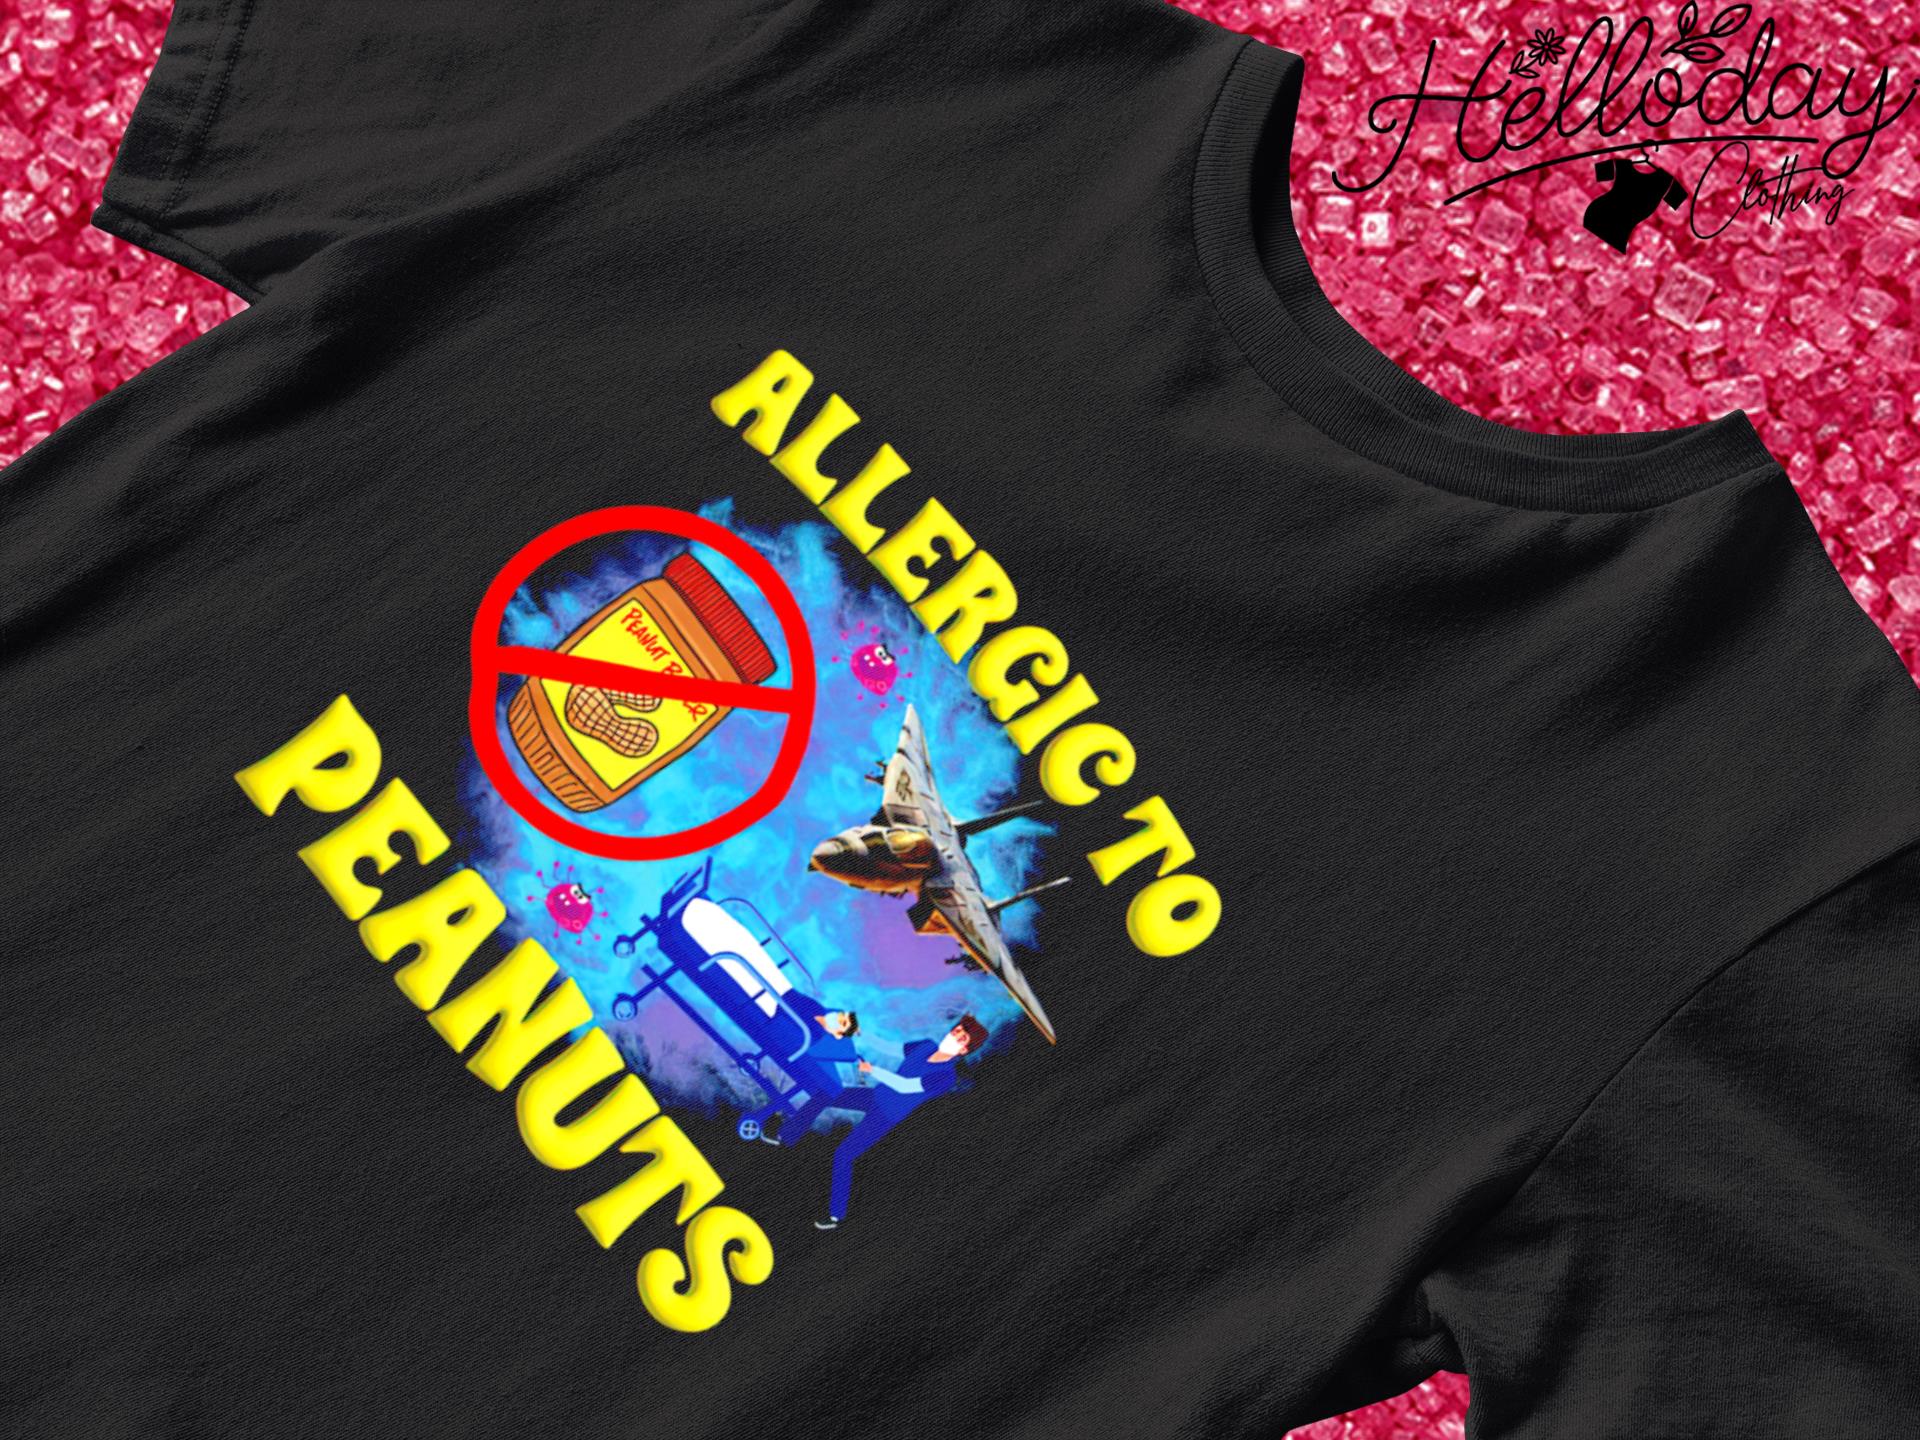 Allergic to peanuts T-shirt